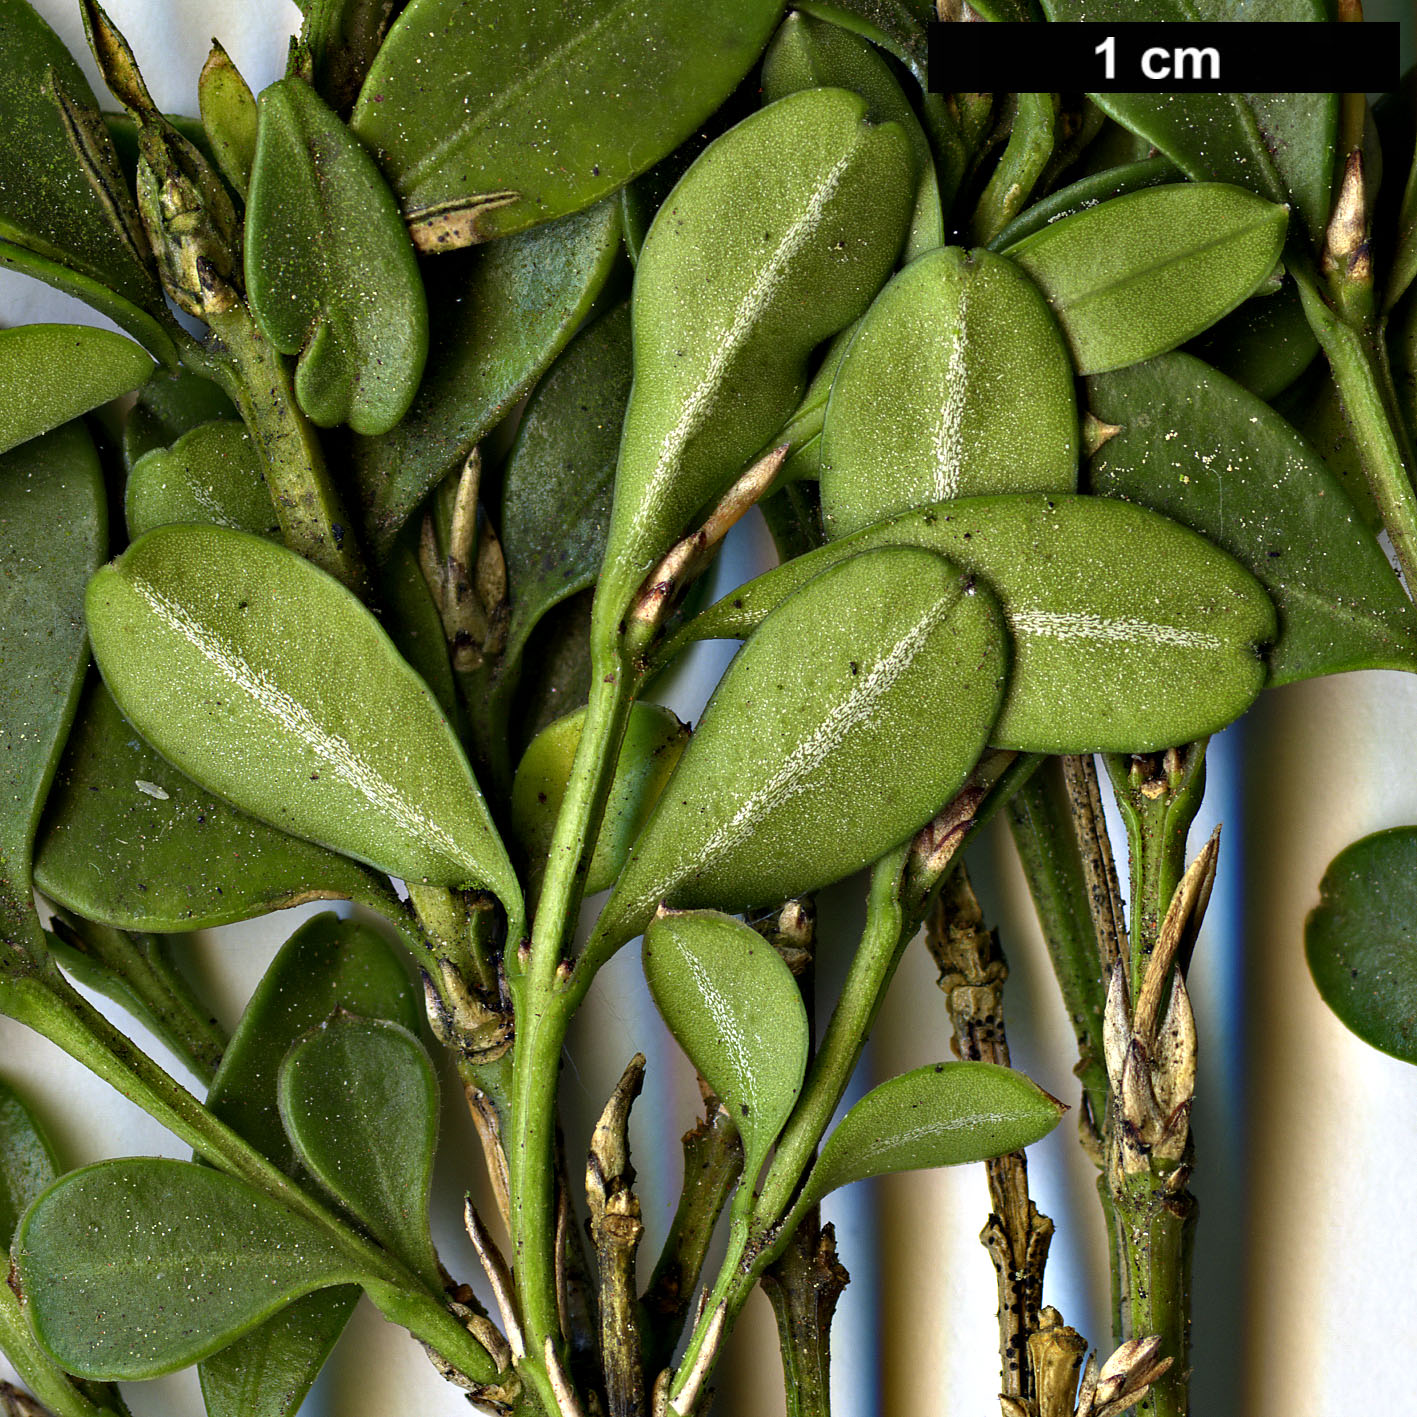 High resolution image: Family: Buxaceae - Genus: Buxus - Taxon: microphylla - SpeciesSub: 'Rococco'